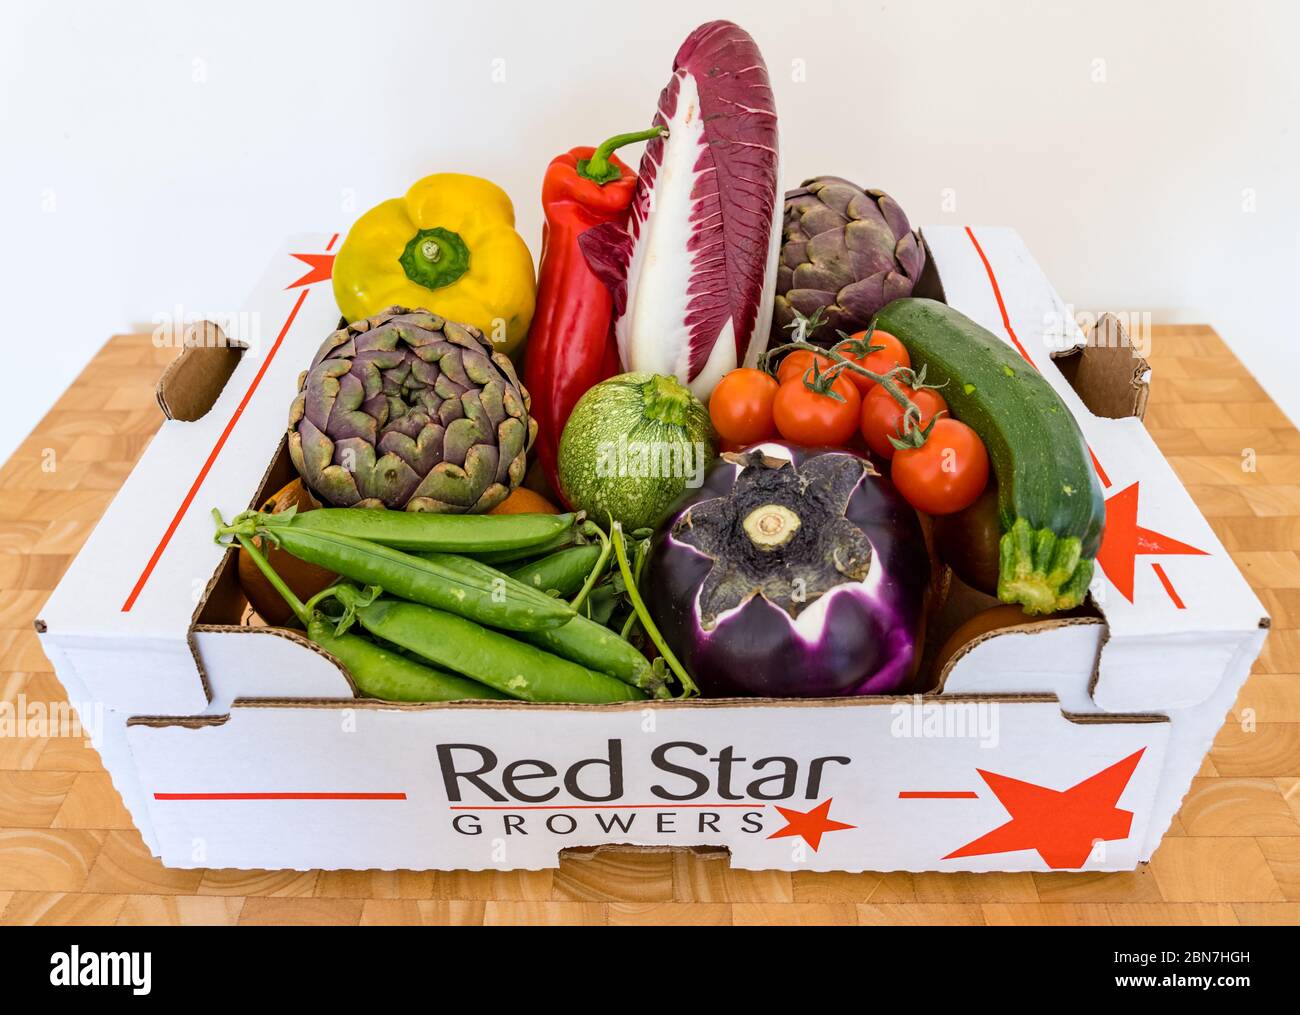 Vegetable delivery box with peppers, endive, aubergine, artichokes, pea pods and cherry tomatoes Stock Photo